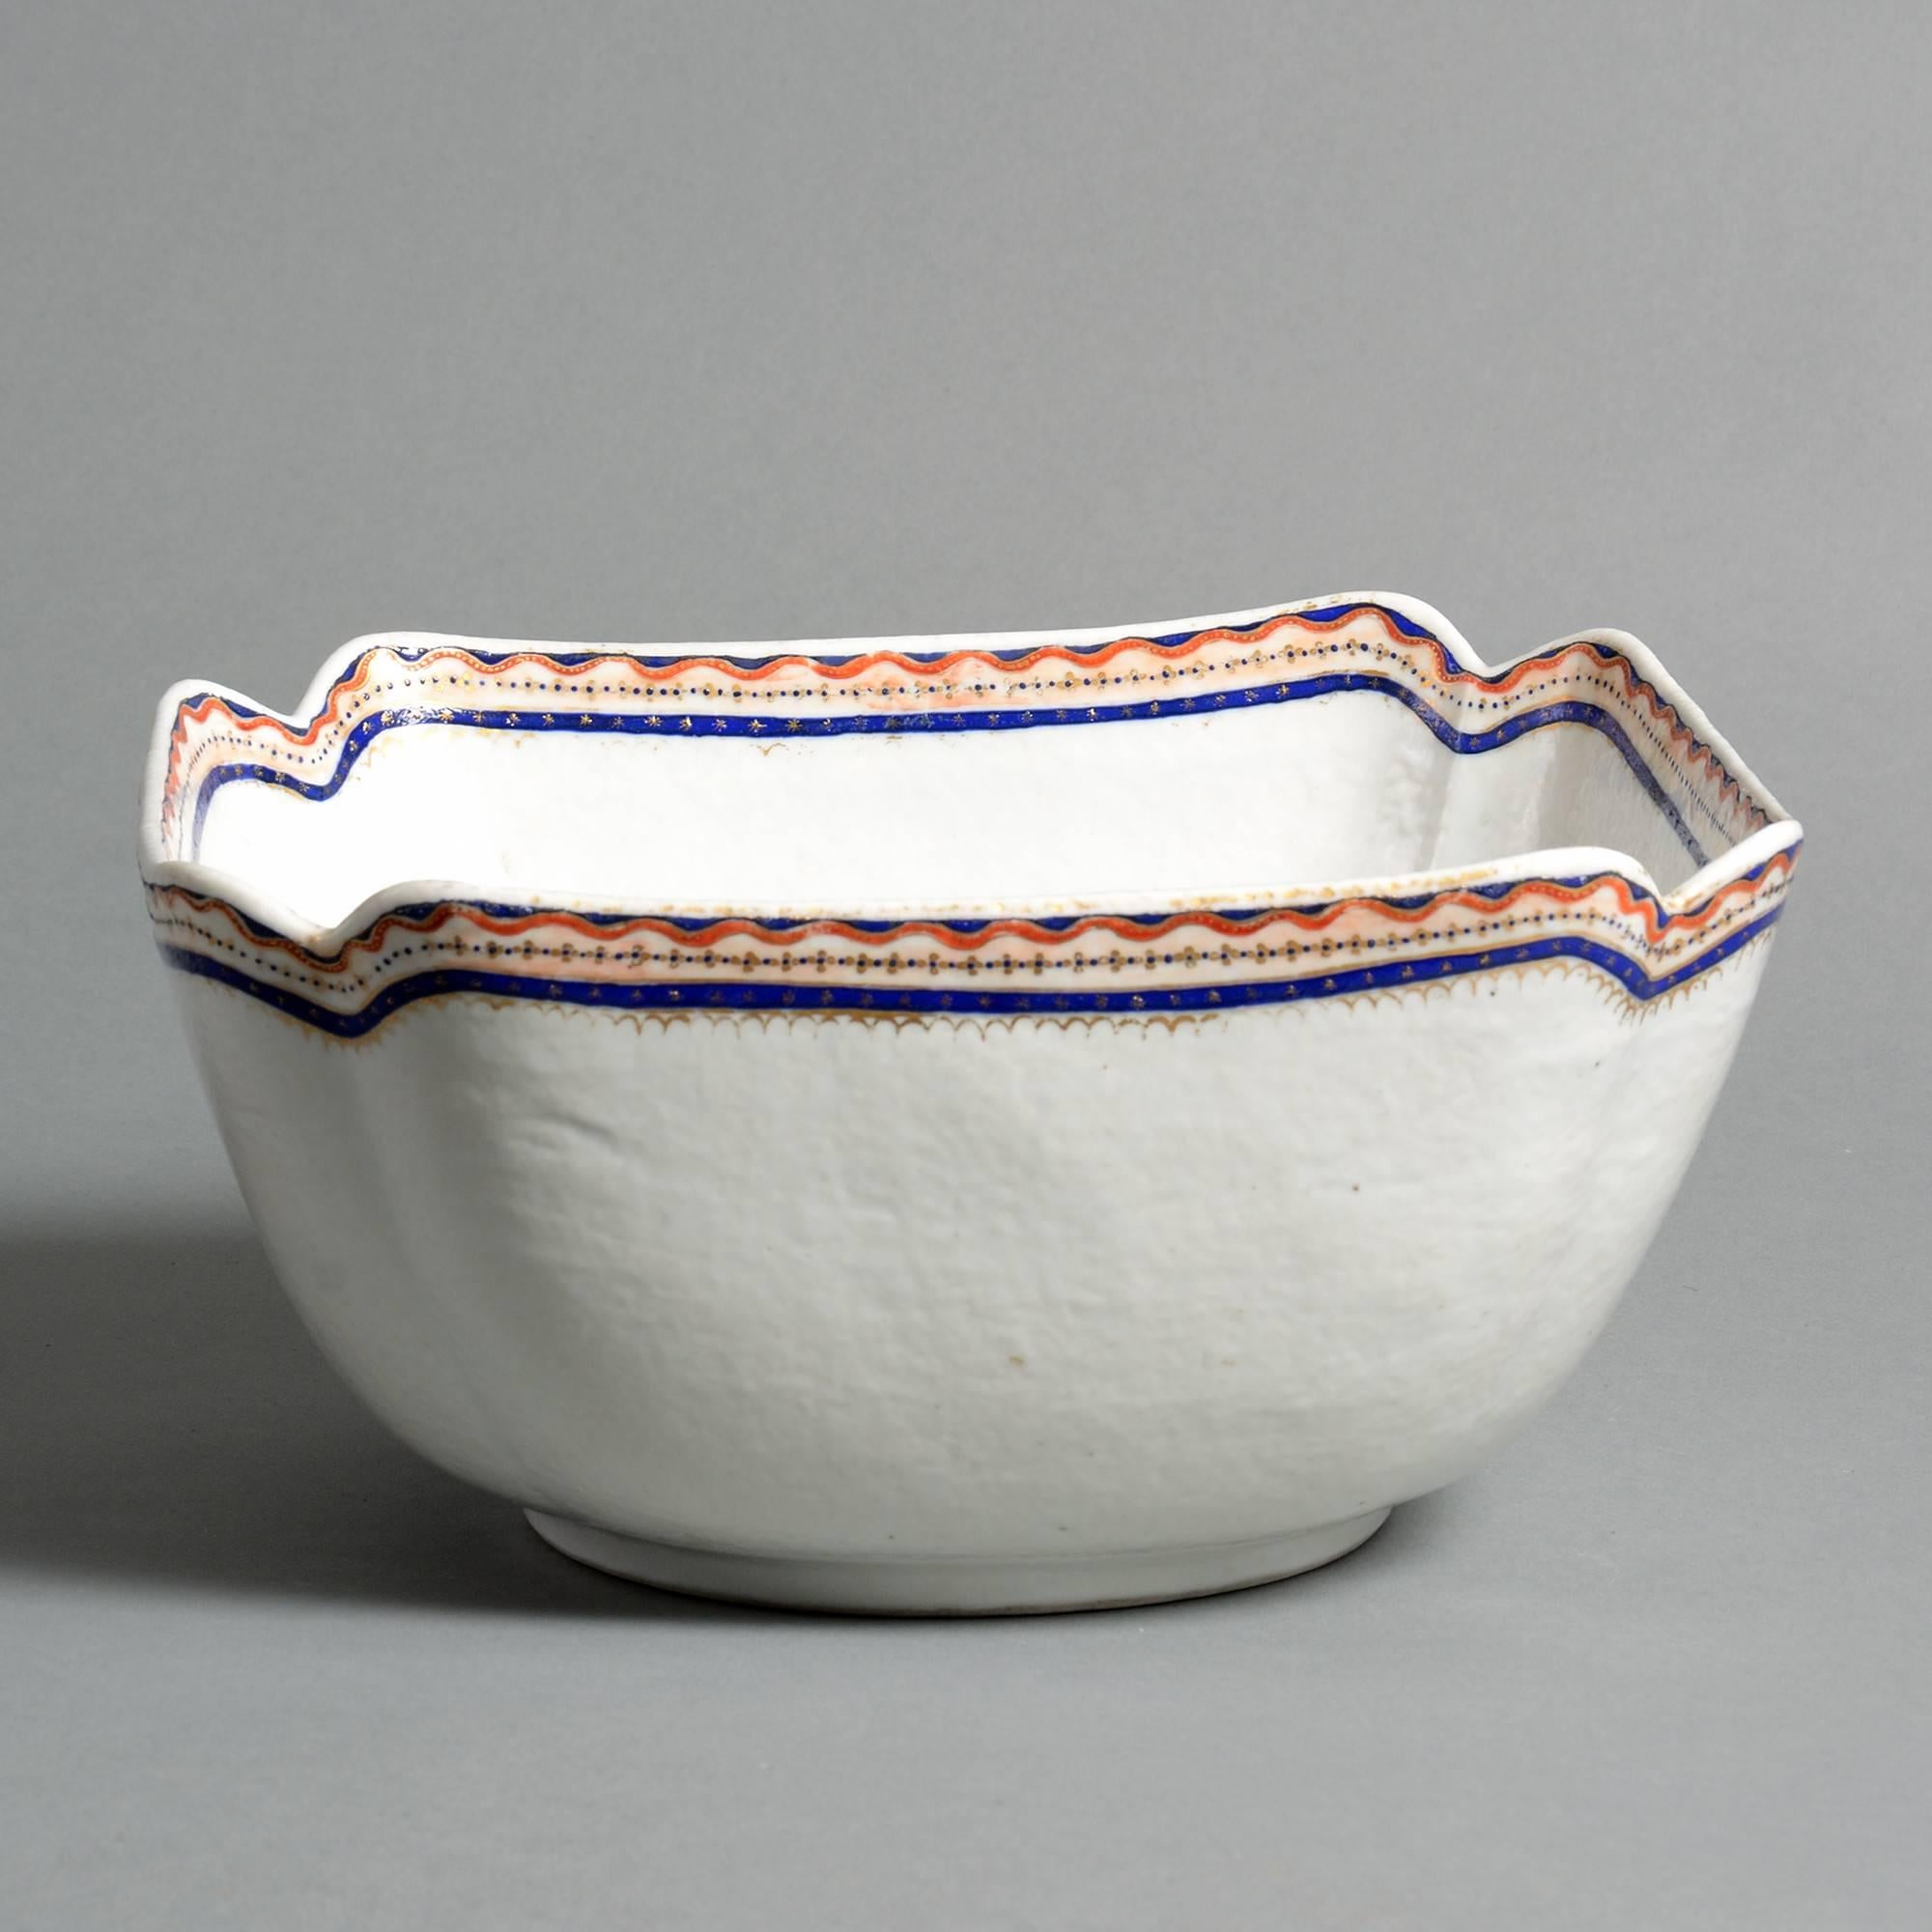 A late 18th century porcelain bowl, the body of square form, having re-entrant corners, the rim with red a blue glazes.

Qing dynasty, Qianlong period (1736-1820).